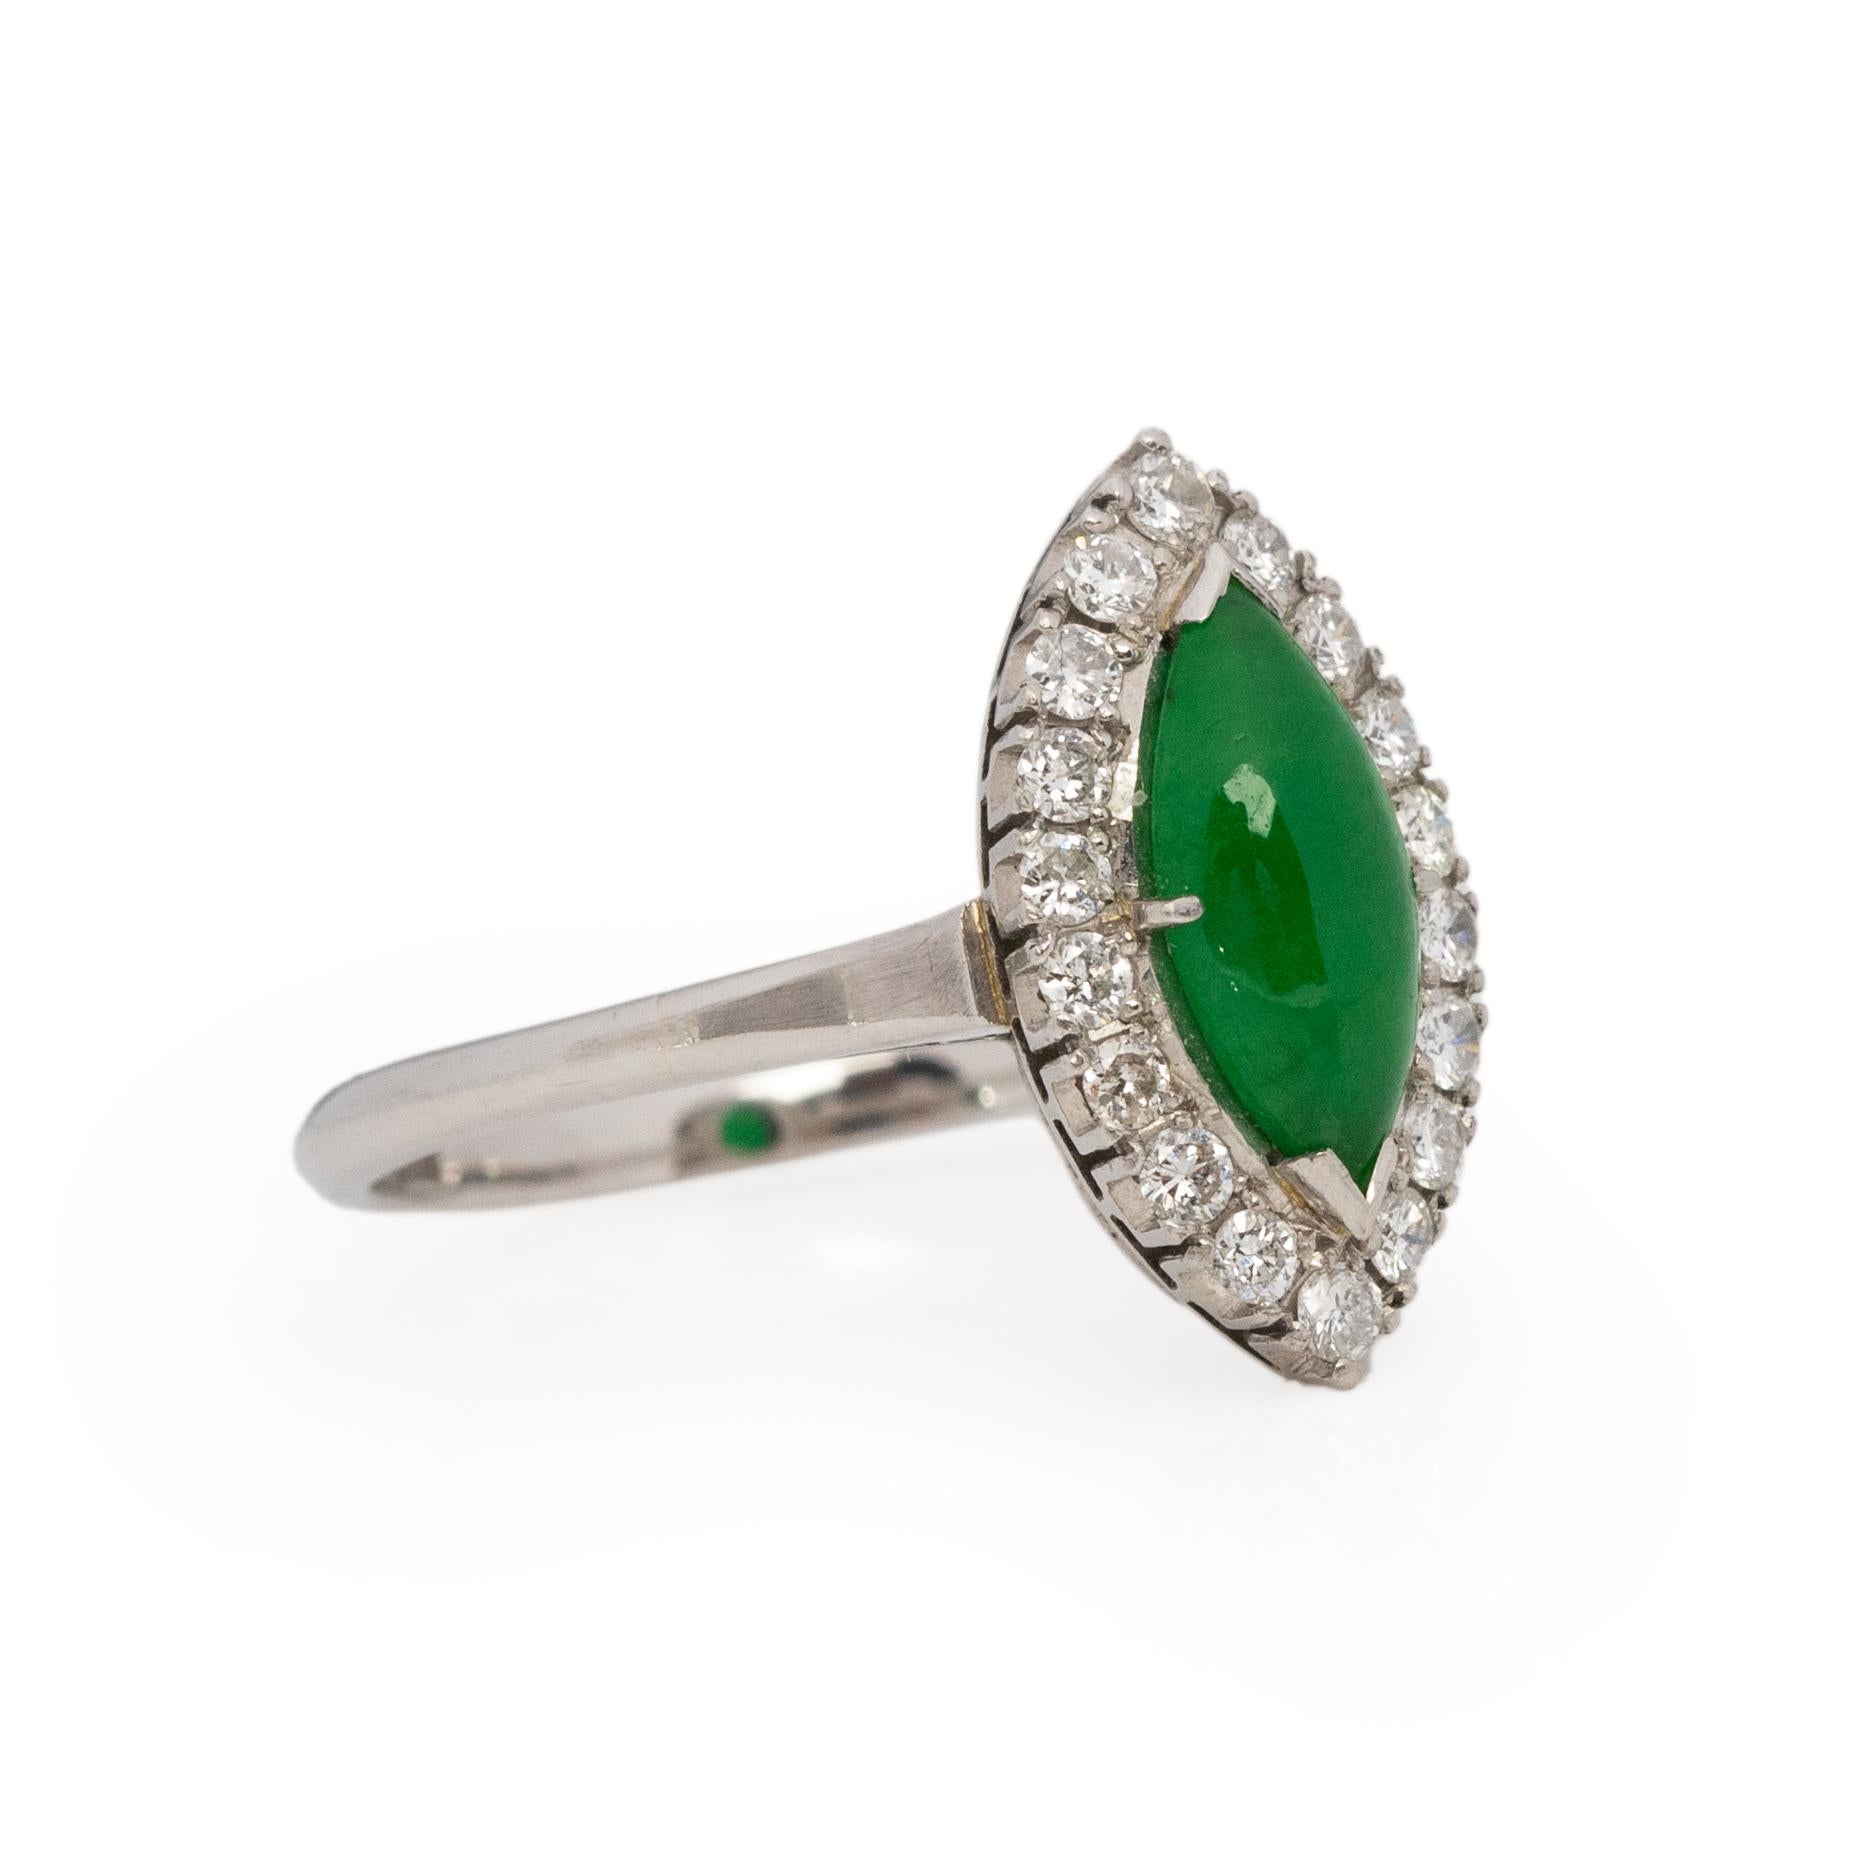 Here we have a vibrant green jade gem that is cut into a marquise. This beautiful piece of jade has a halo of single cut diamonds surrounding it highlighting its breathtaking color. The ring is crafted from platinum, with a simple shank, the gallery